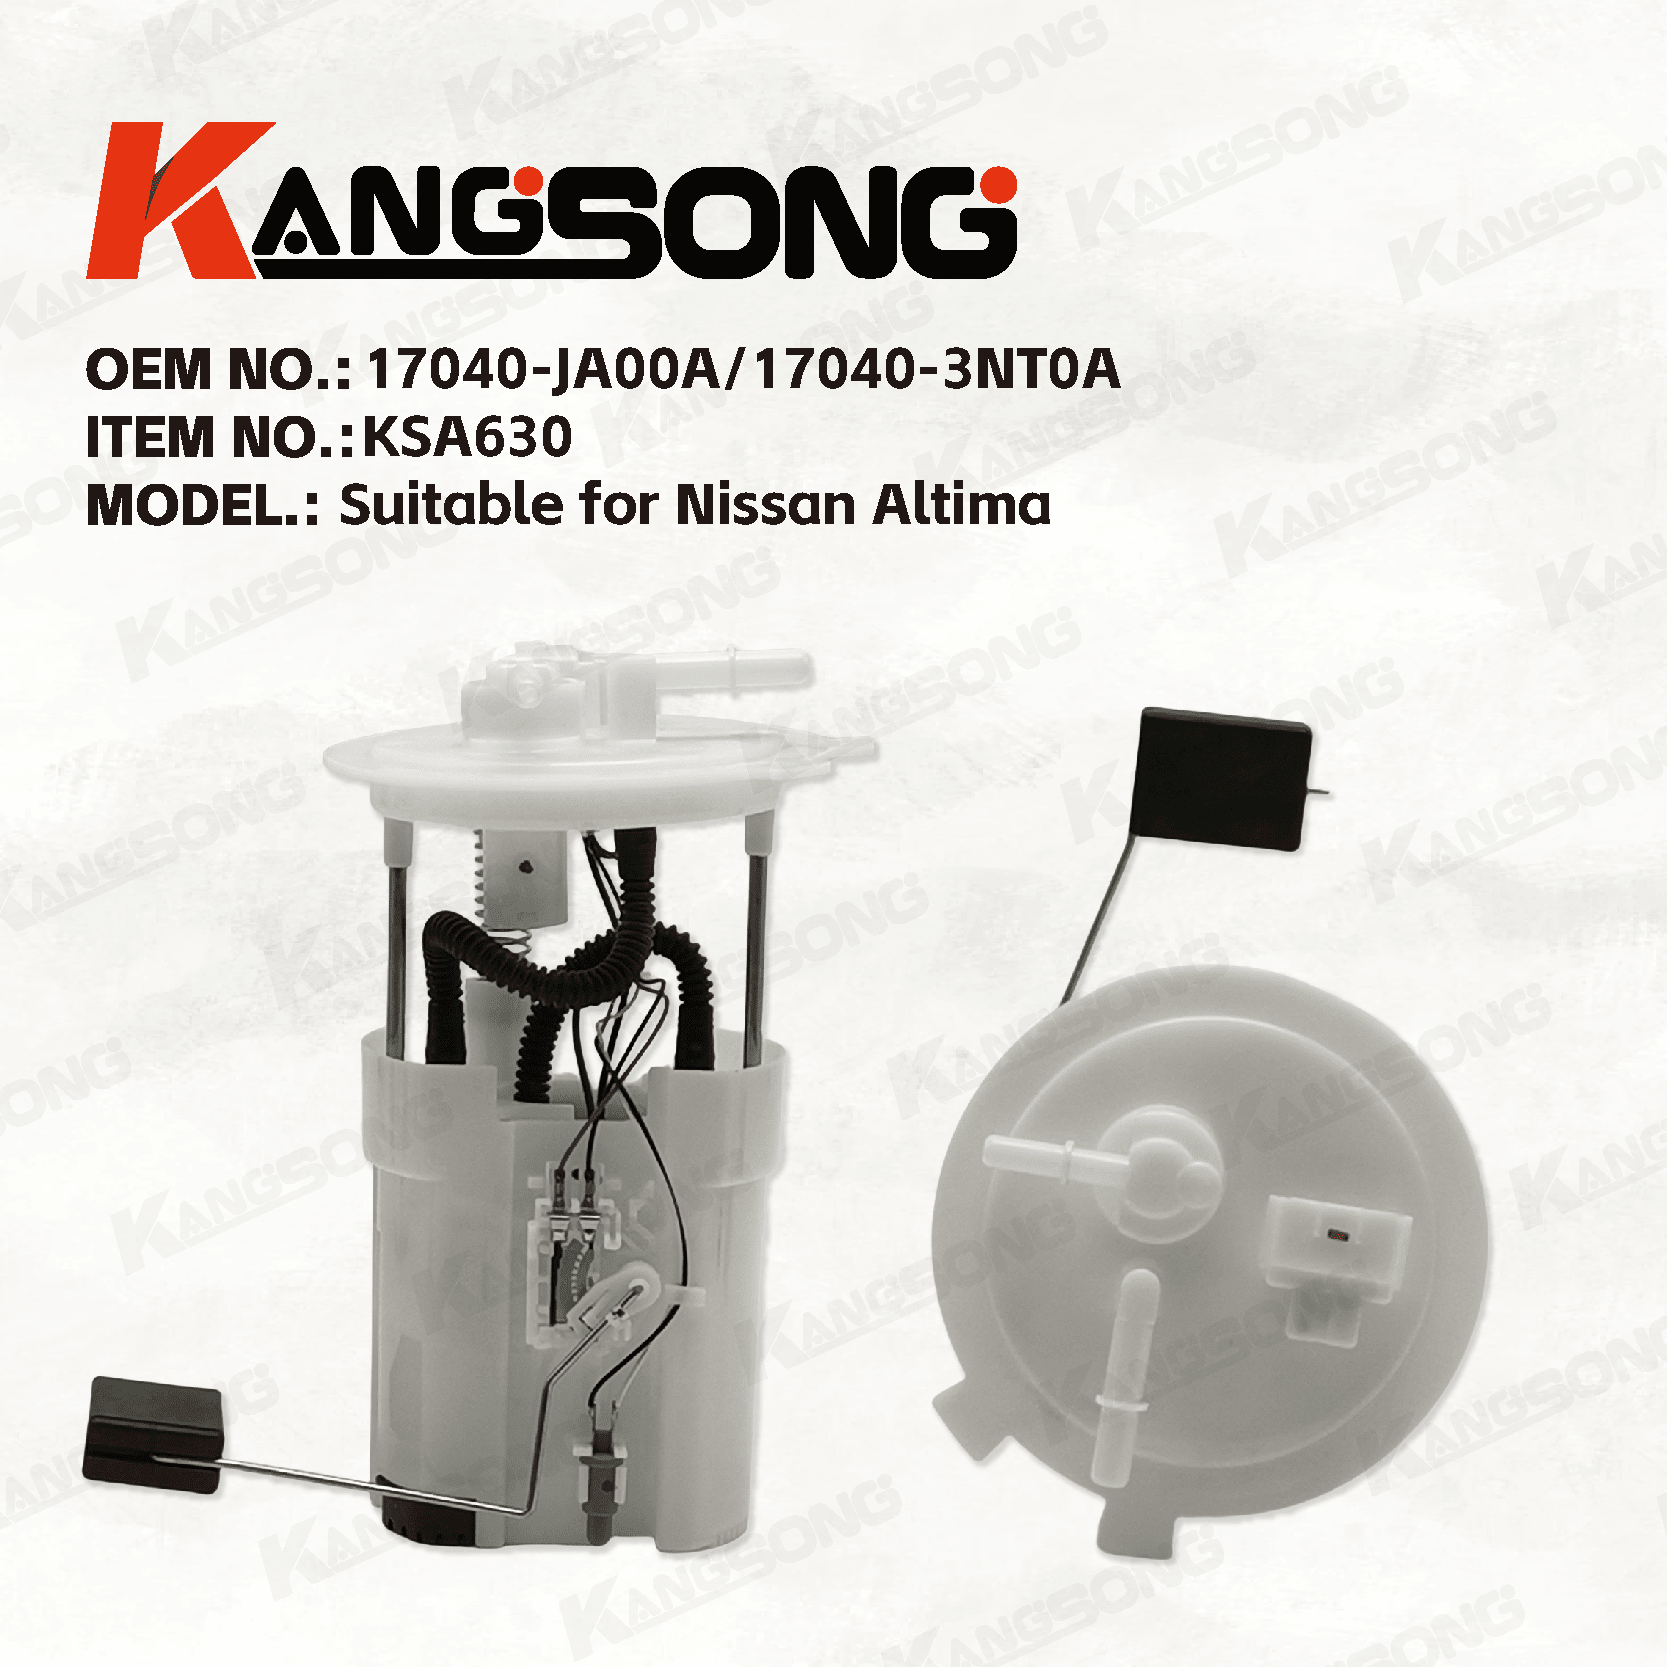 Applicable to Nissan Altima/E8755M 17040-9N00A 17040-ZX00A 17040-JA00A 17040-3NT0A/Fuel Pump Assembly/ KS-A630